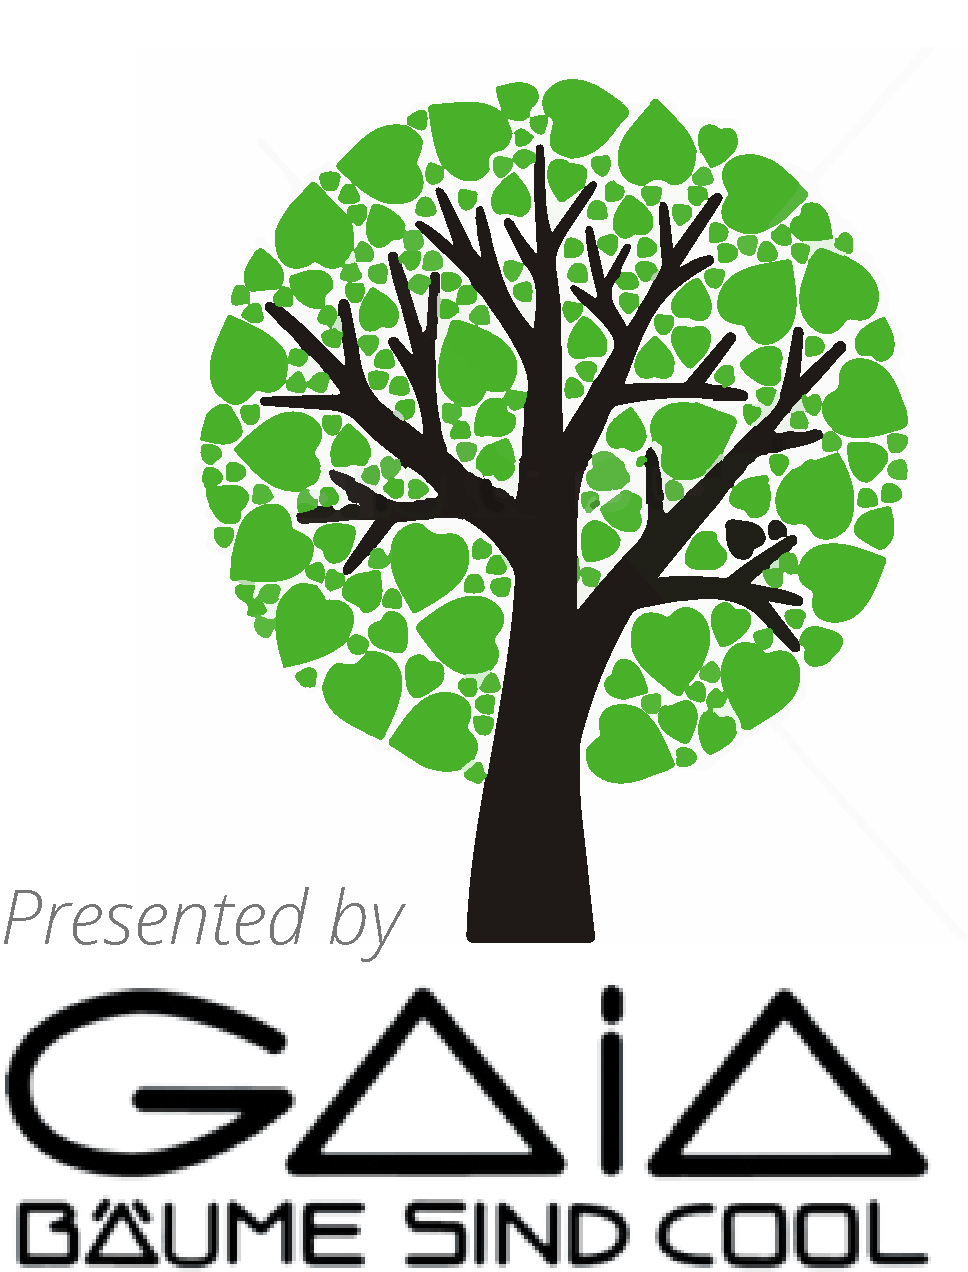 Presented by Gaia